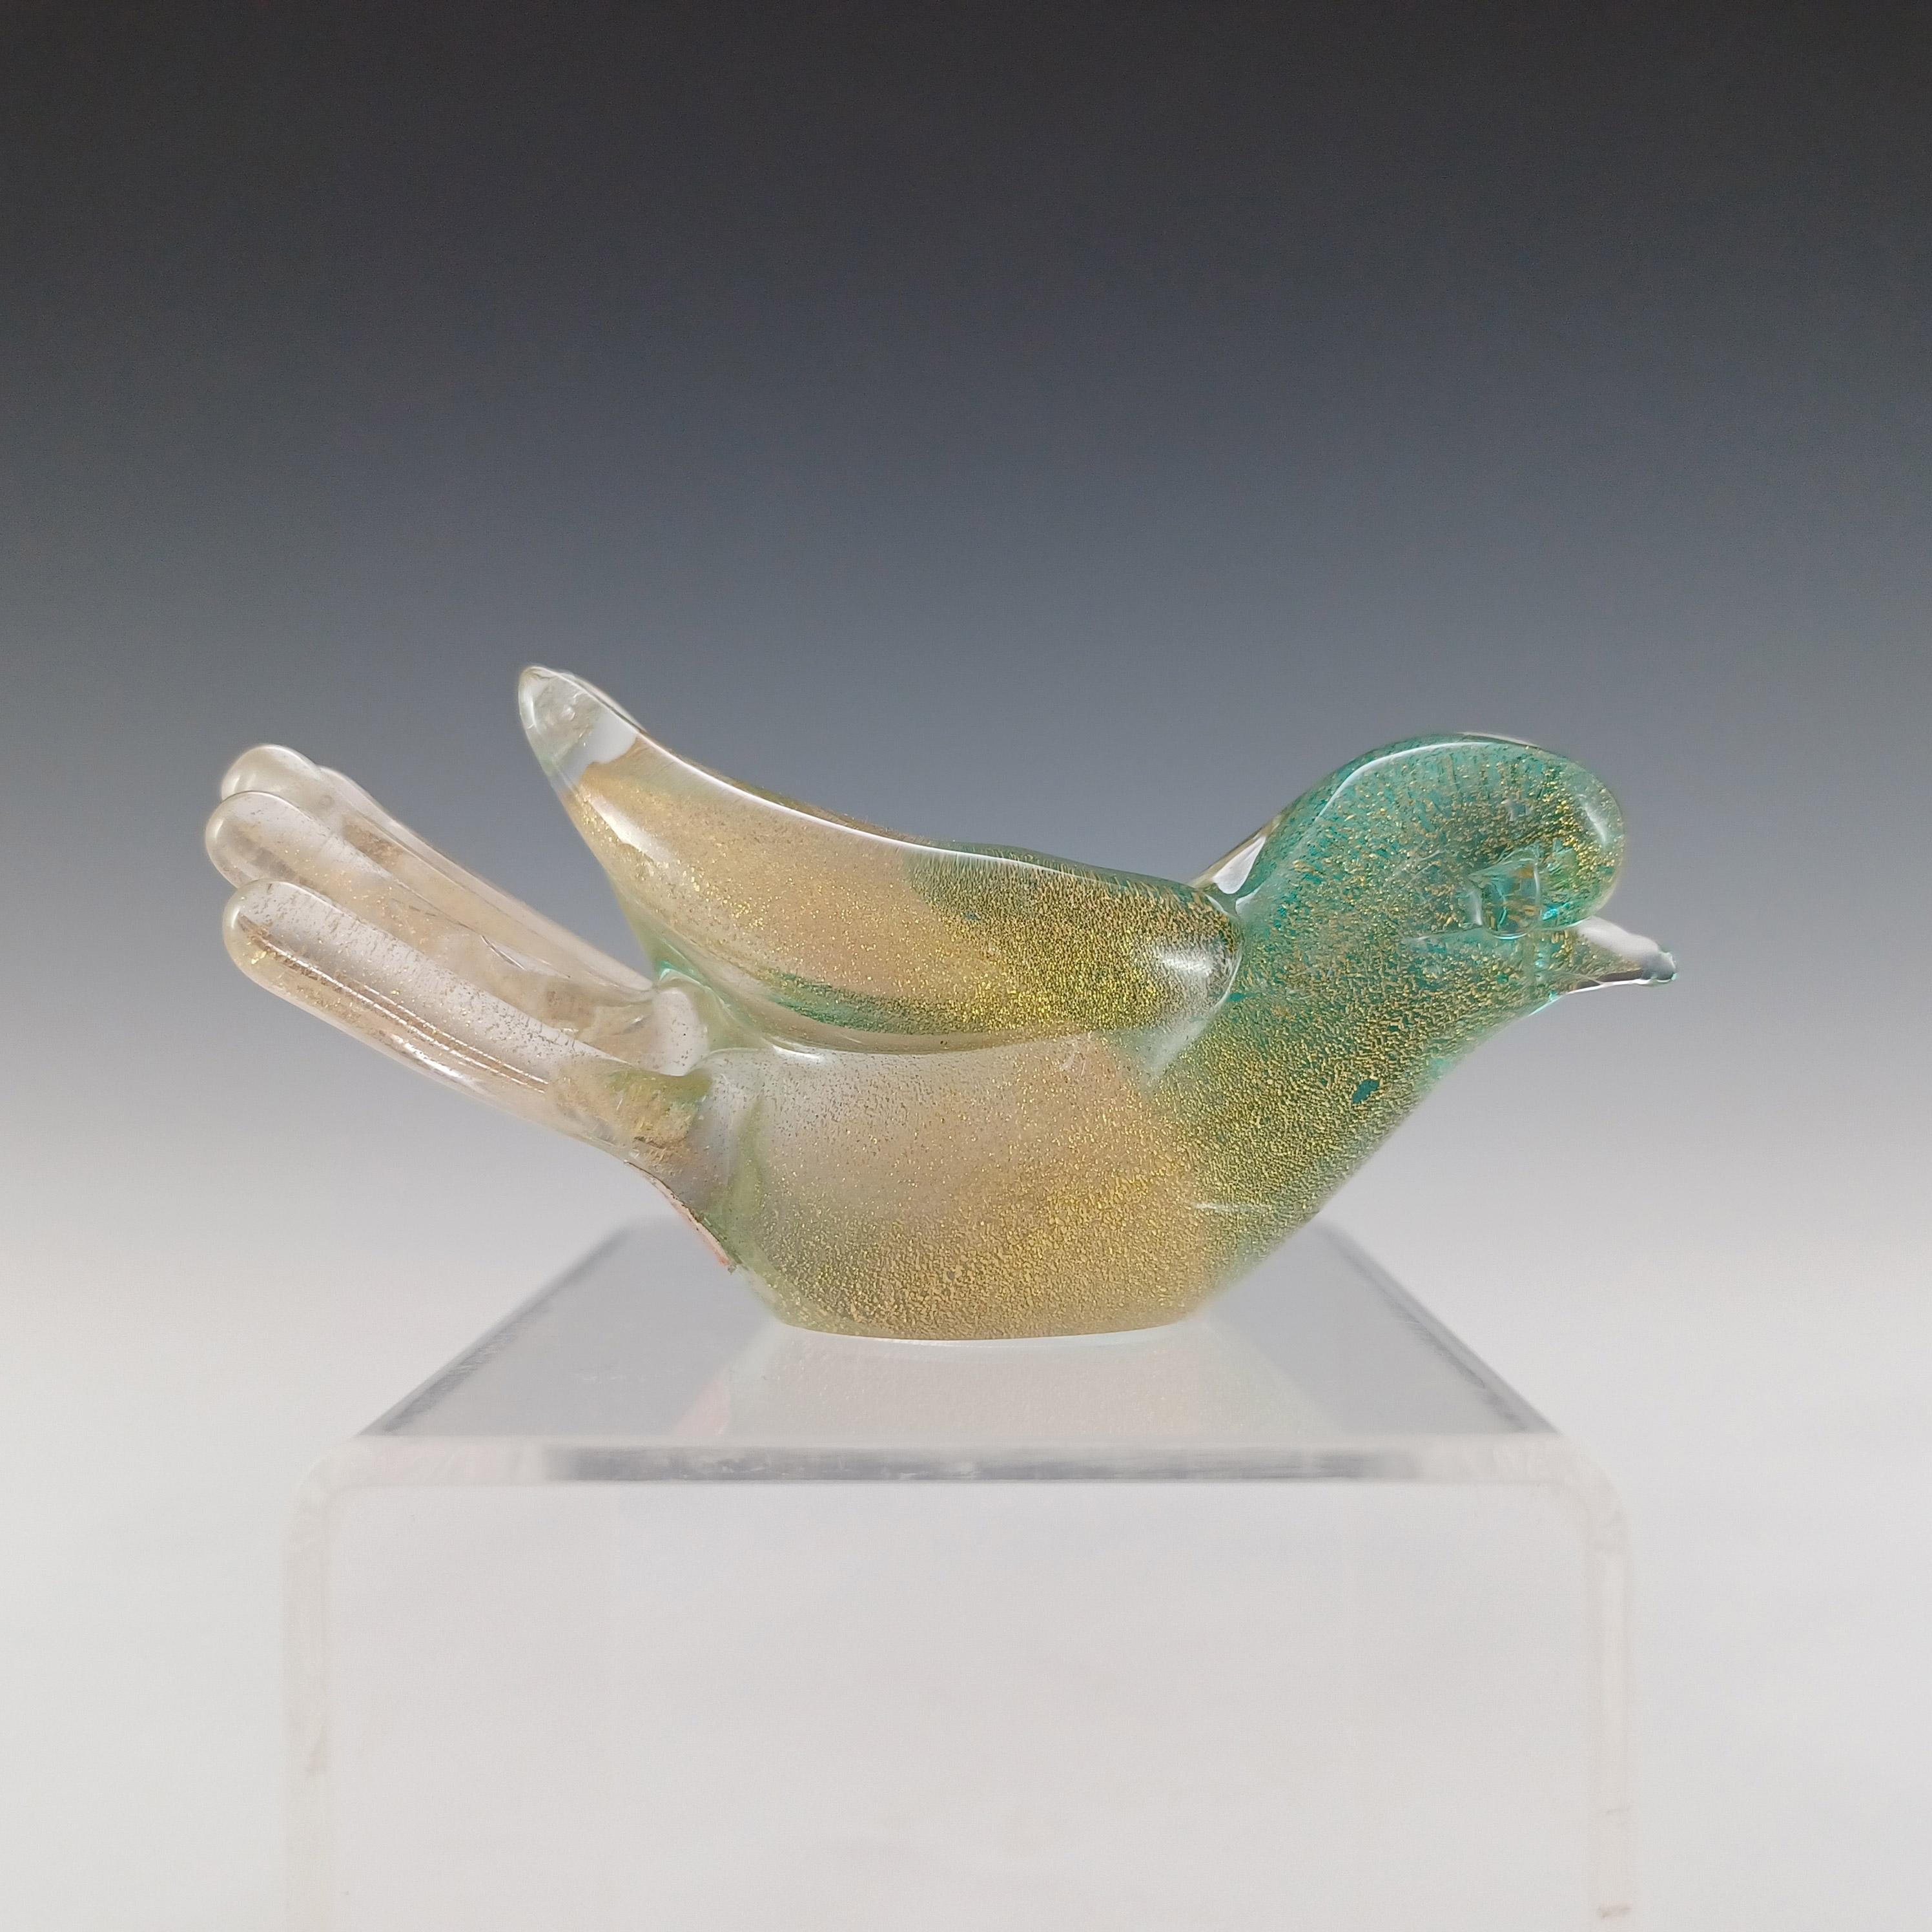 Here is a wonderful Venetian bird sculpture, made on the island of Murano, near Venice, Italy. Made by Seguso Vetri d'Arte, and designed by either Flavio Poli or Mario Pinzoni in the 1950's. Both were designers at the factory during this period.